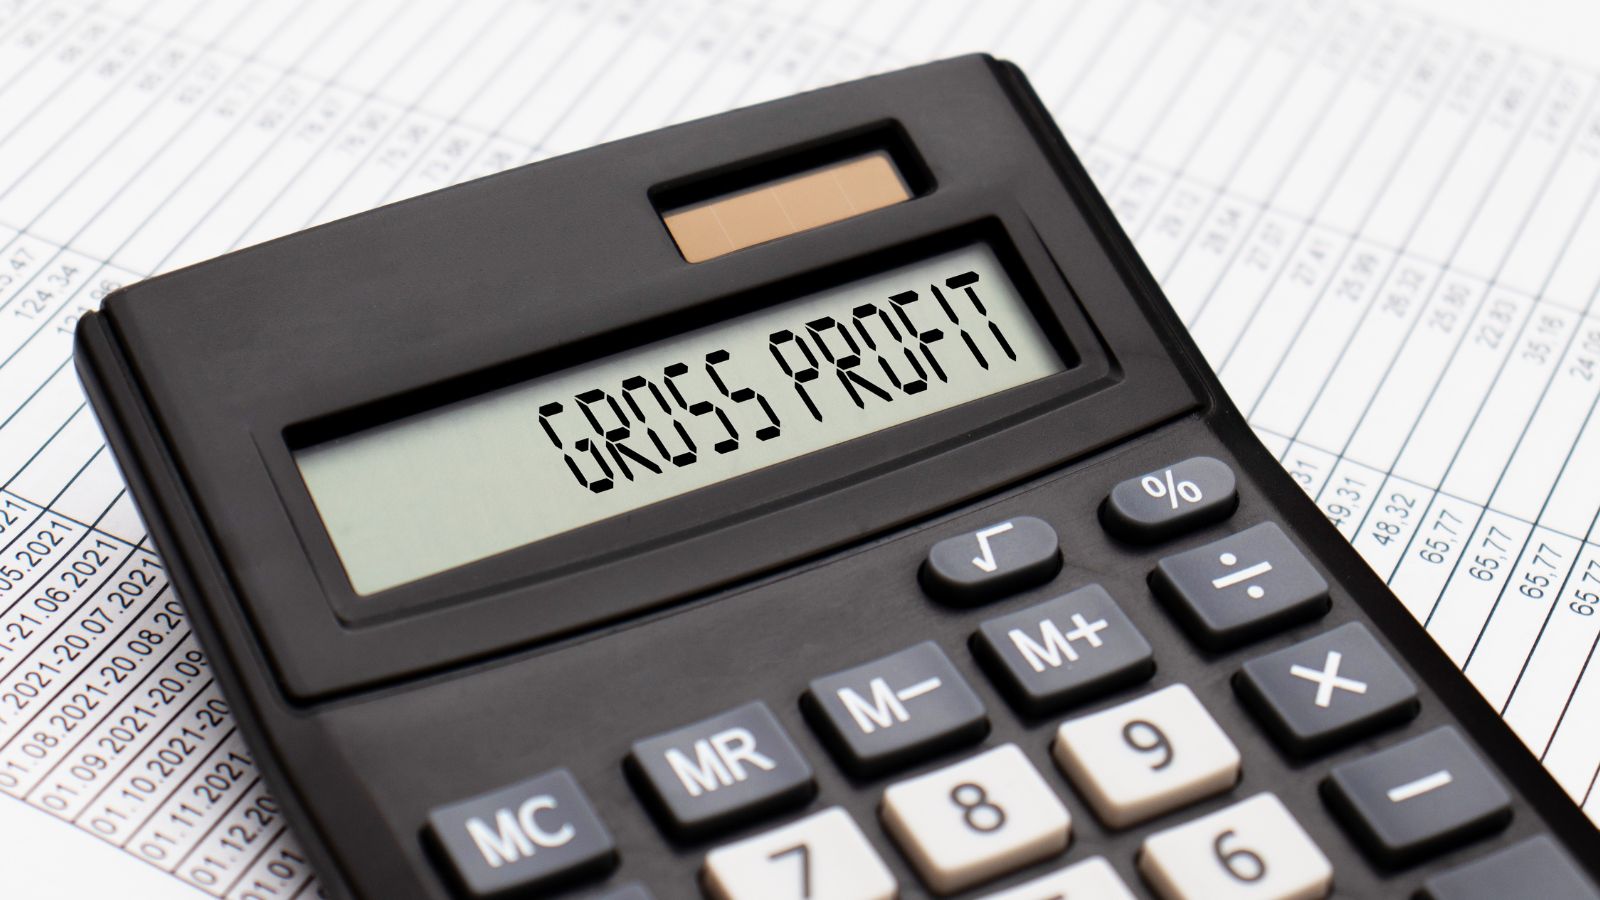 calculator showing the words "Gross Profit" for needing an accountant for starting a business.